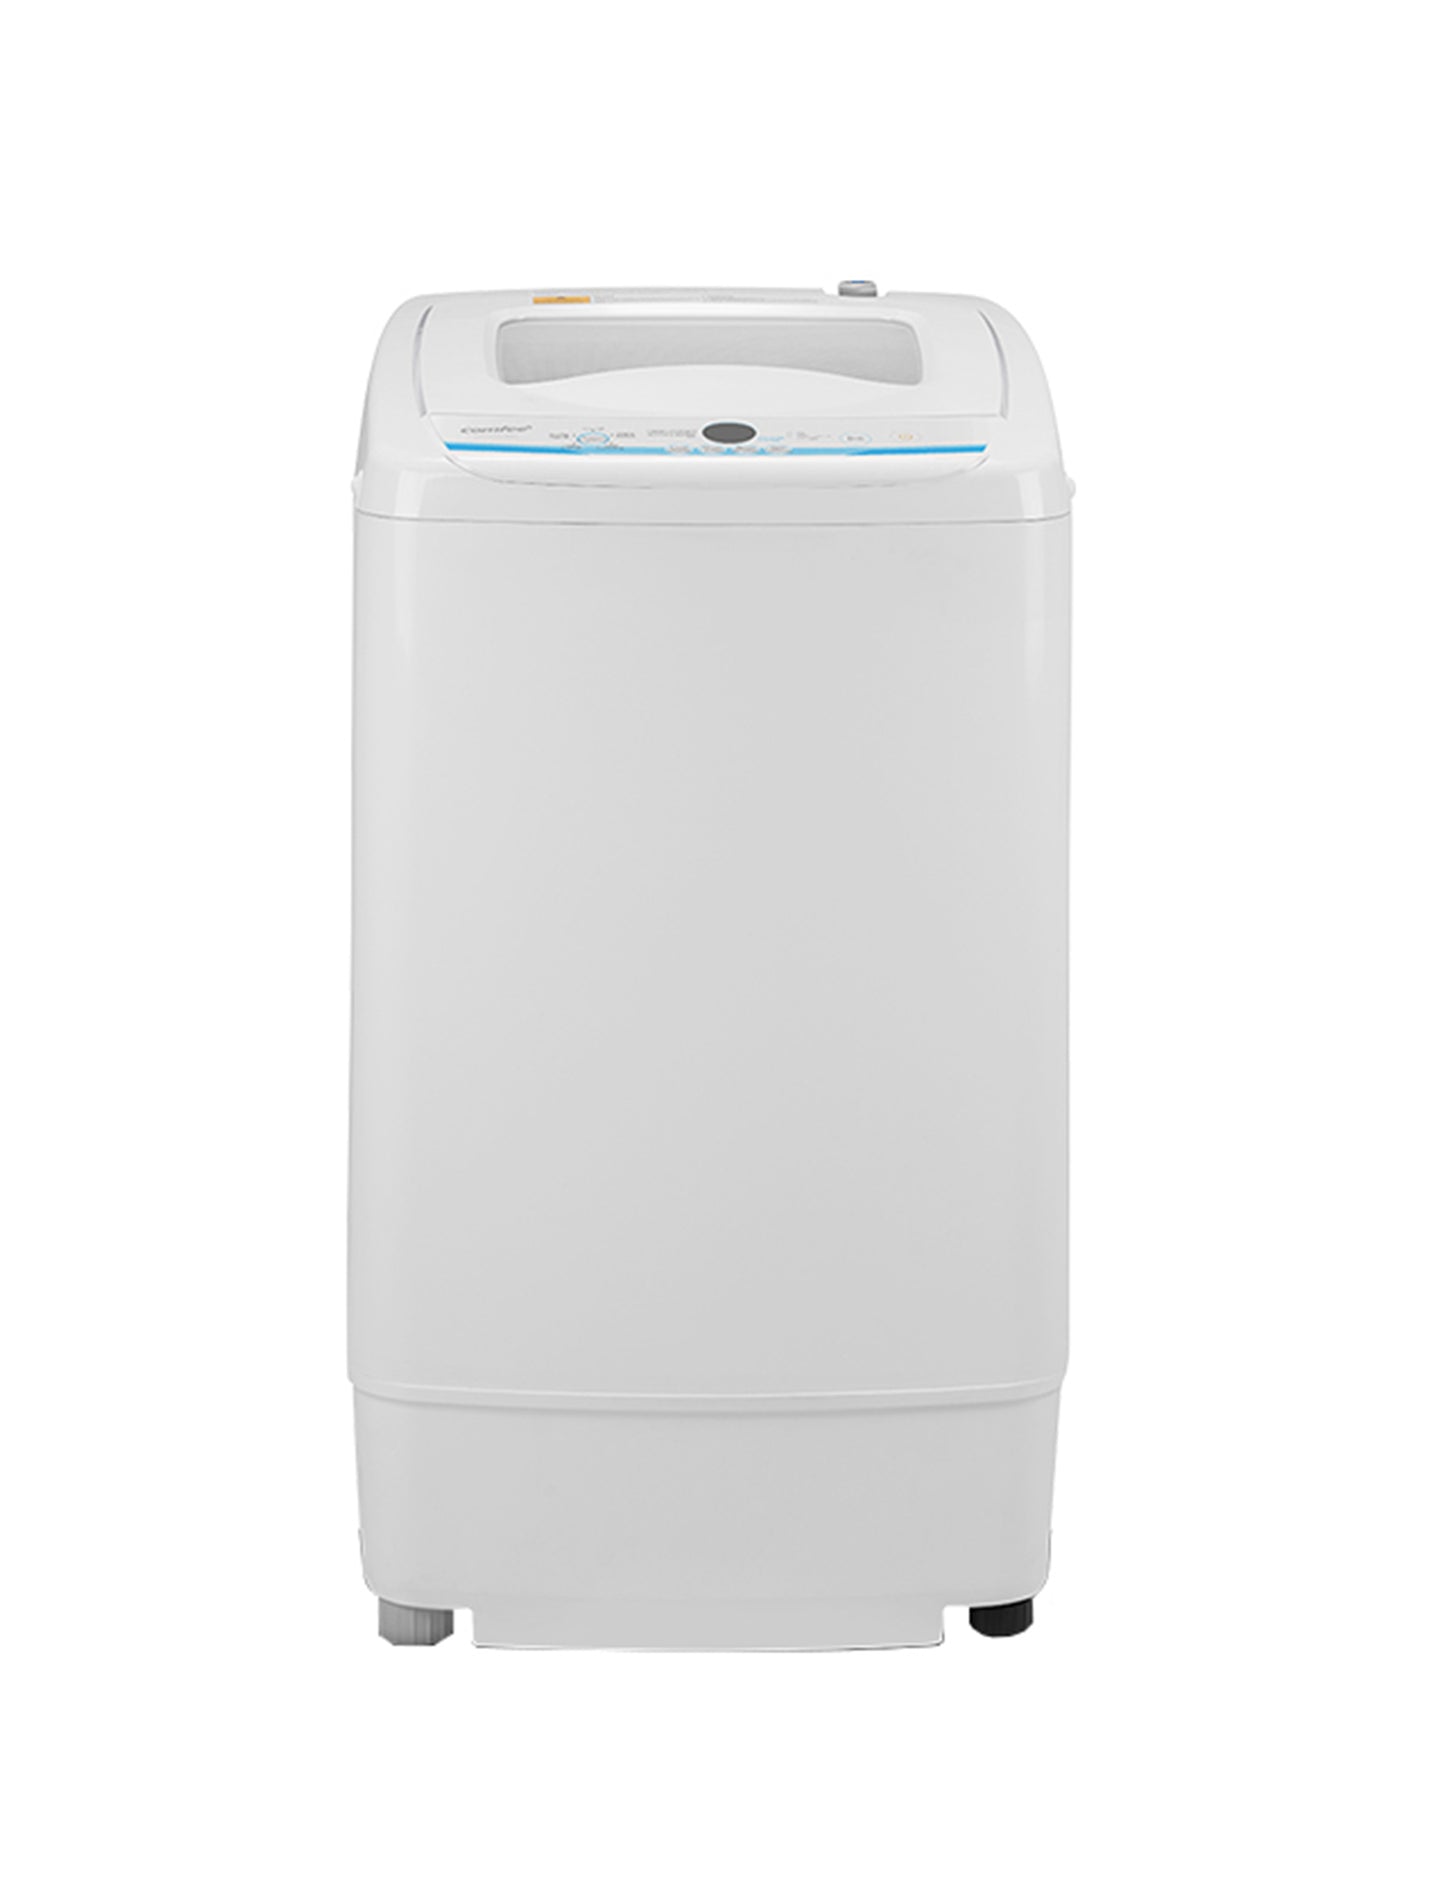 COMFEE' Portable Washing Machine, 0.9 Cu.ft Compact Washer With LED  Display, 5 Wash Cycles, 2 Built-in Rollers, Space Saving Full-Automatic  Washer, Ideal for RV/Dorm/Apartment, Ivory White